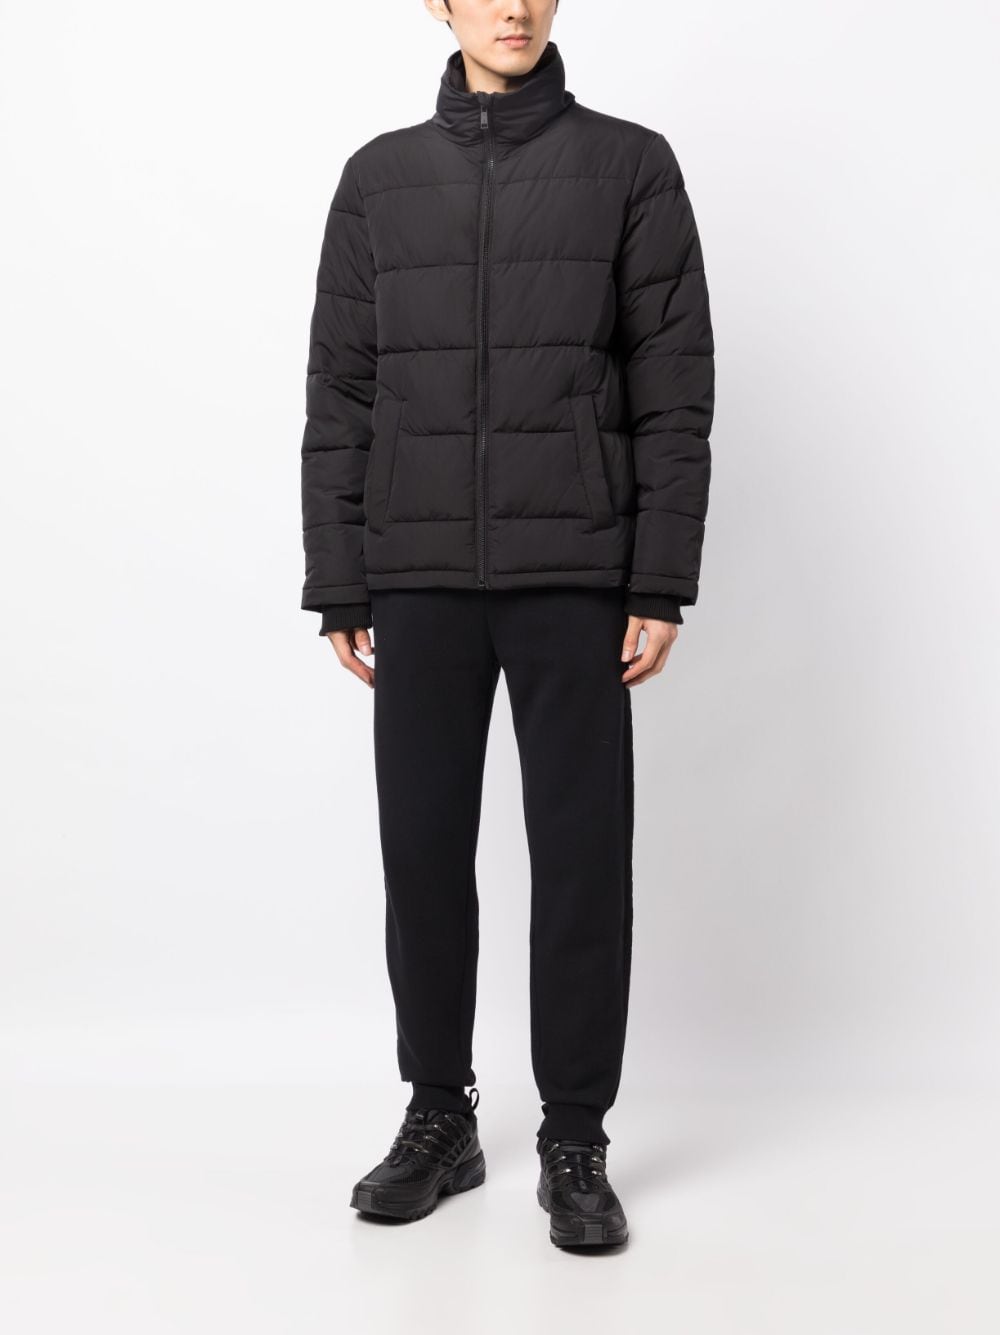 Image 2 of The Upside Cohen puffer jacket